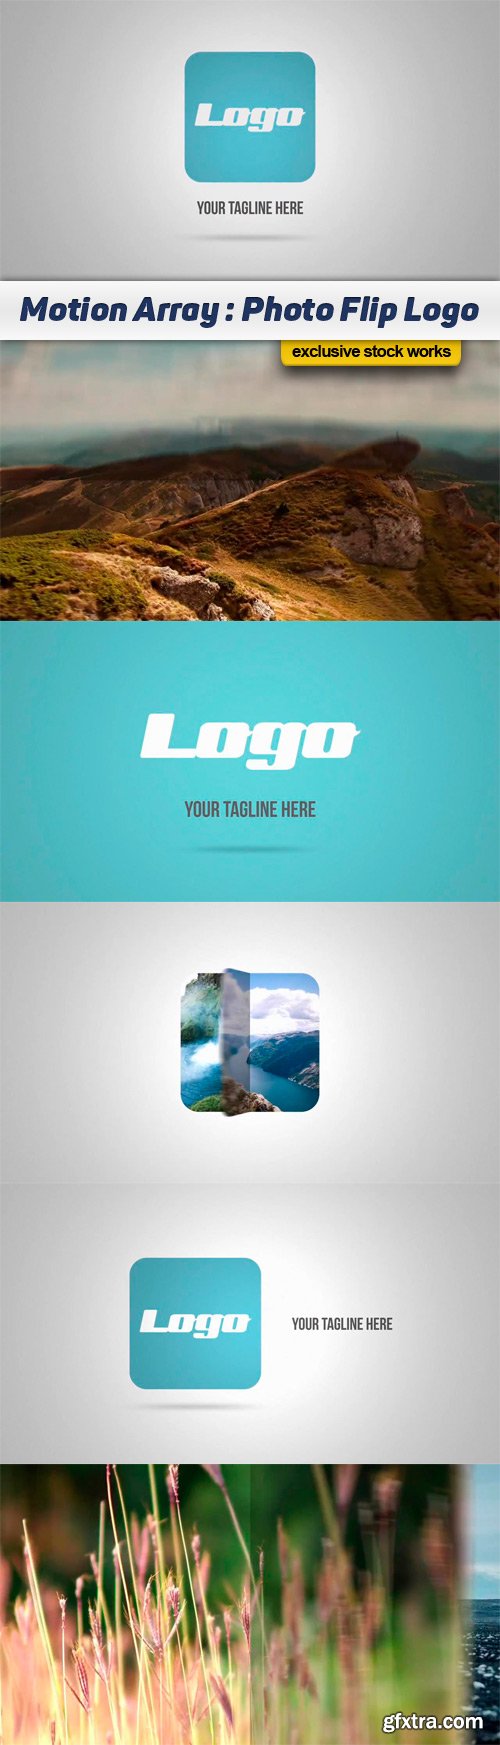 Motion Array - Photo Flip Logo After Effects Template